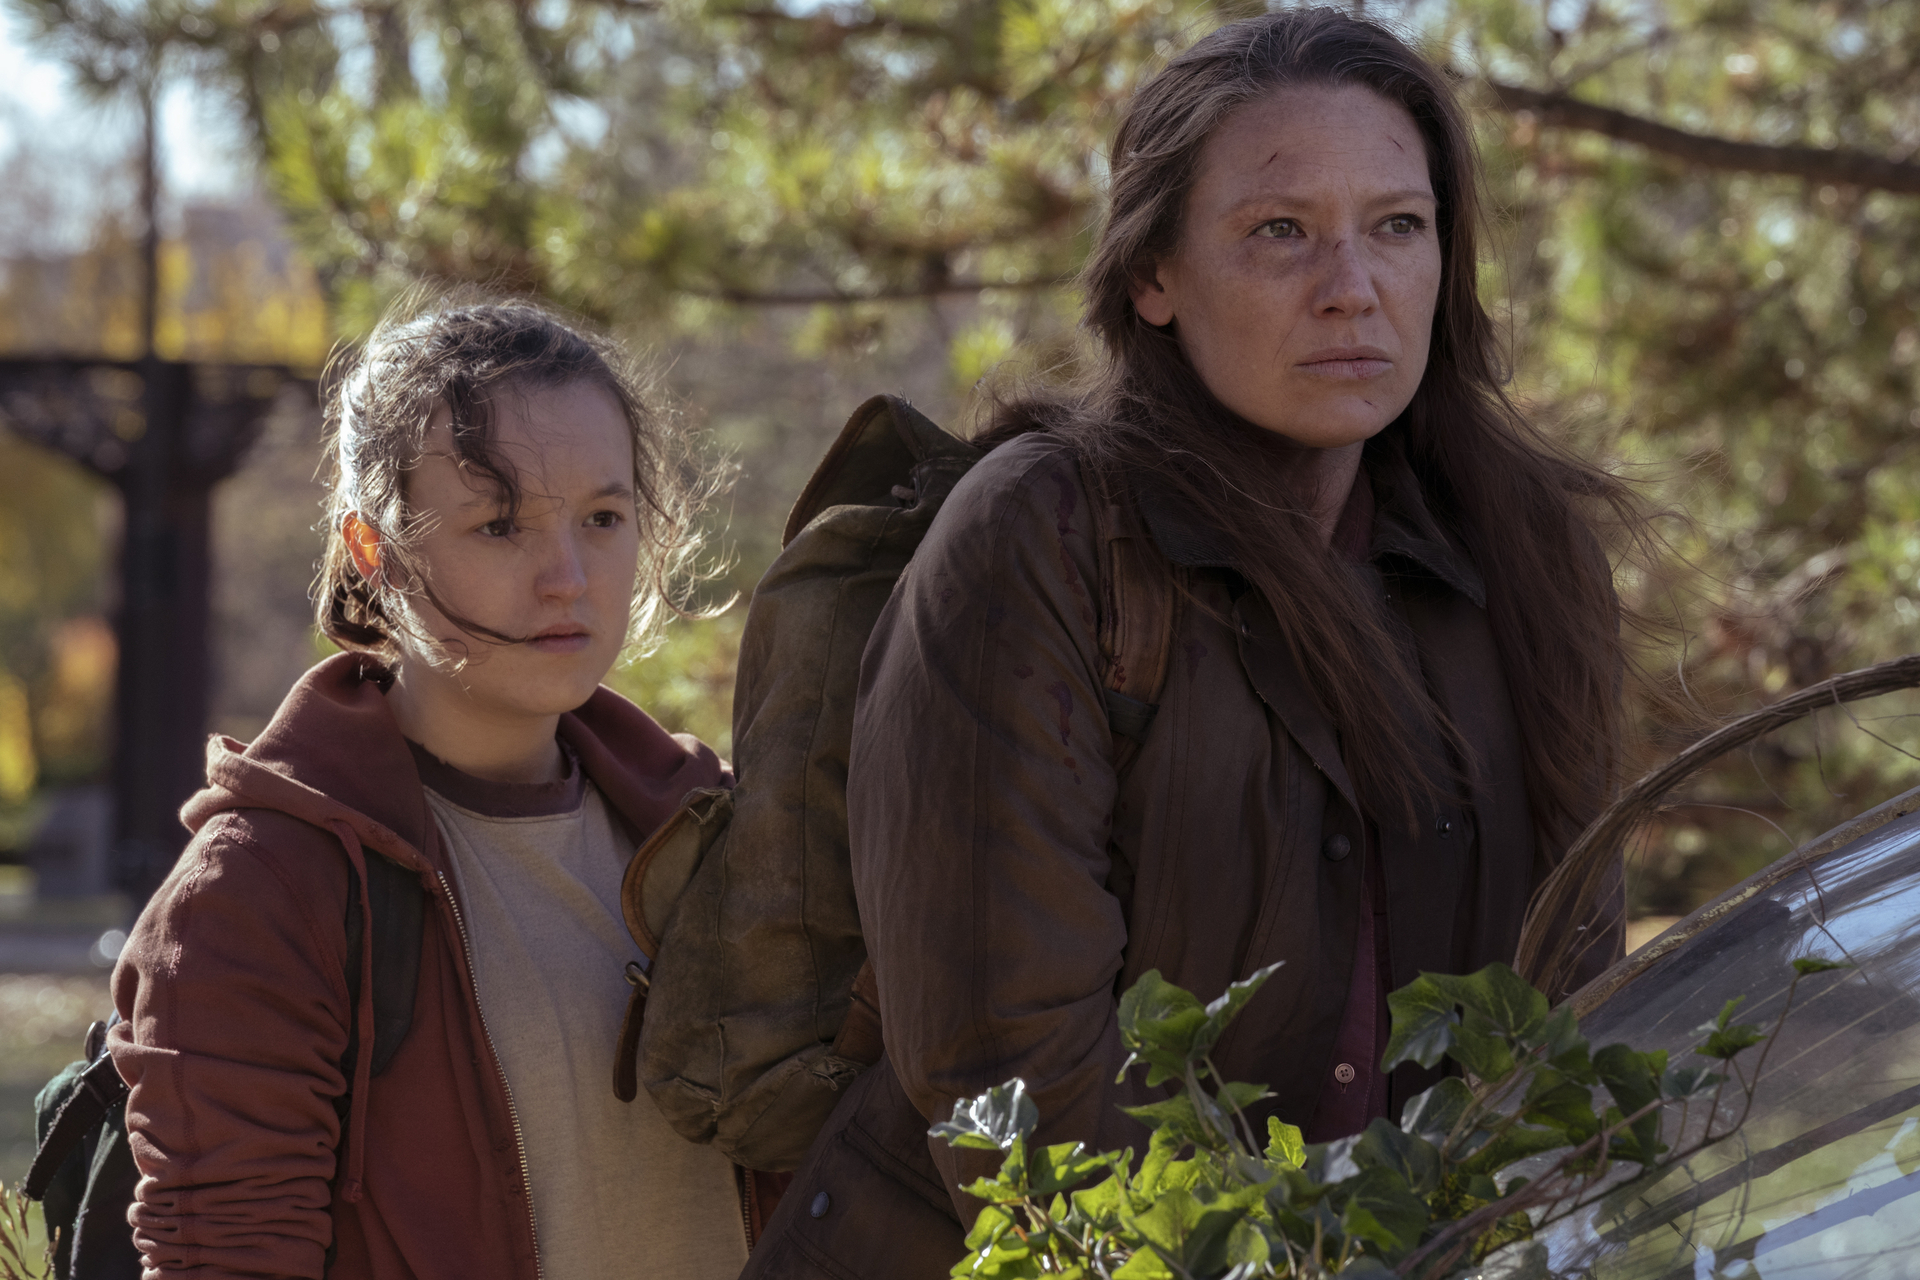 Bella Ramsey and Anna Torv in HBO's The Last of Us 1x02 "Infected"